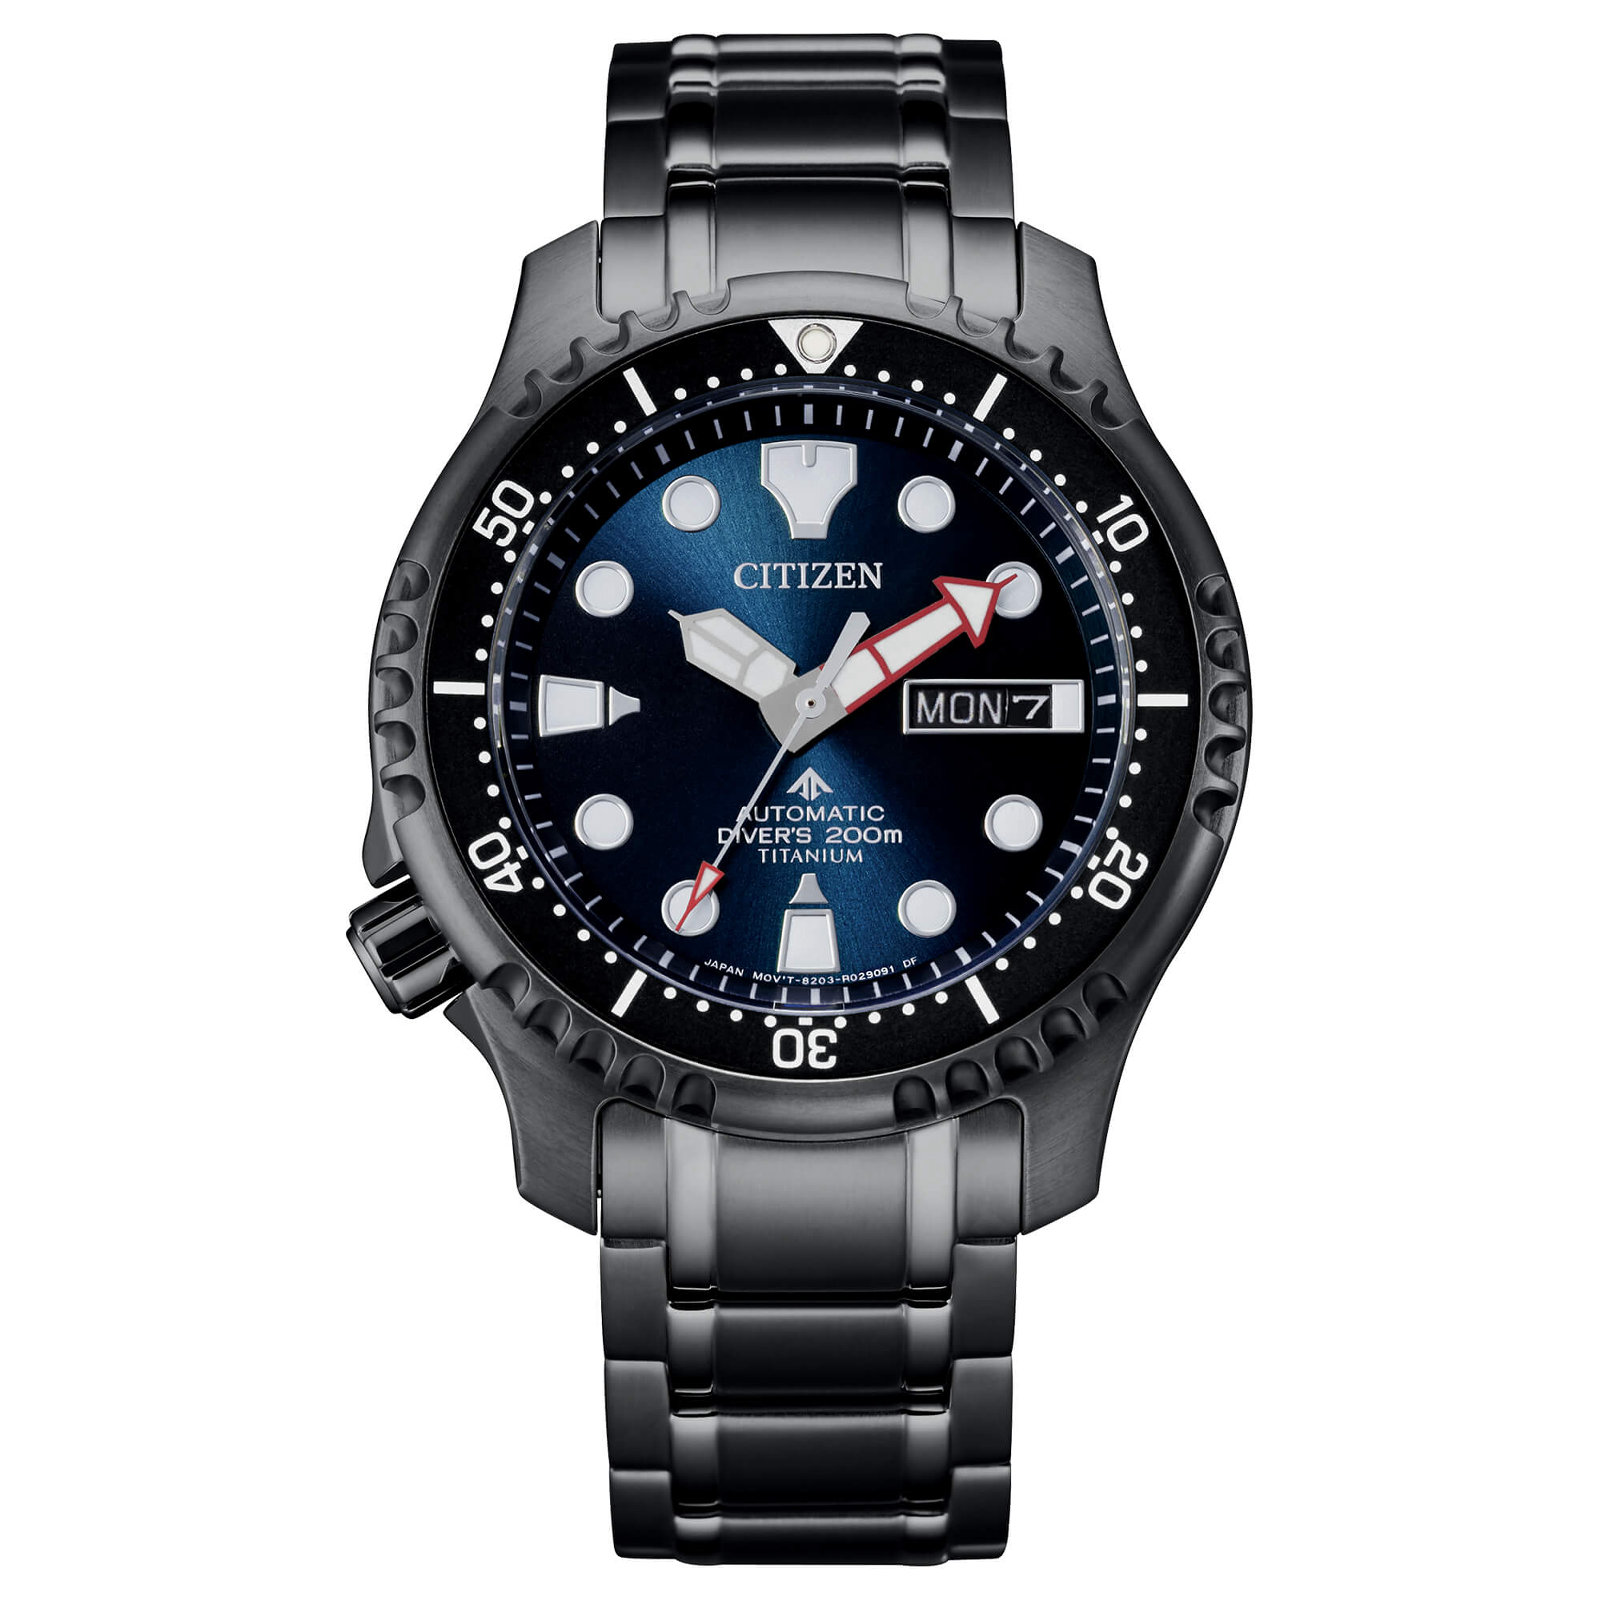 Citizen Diver's Limited Edition NY107-85L Watch